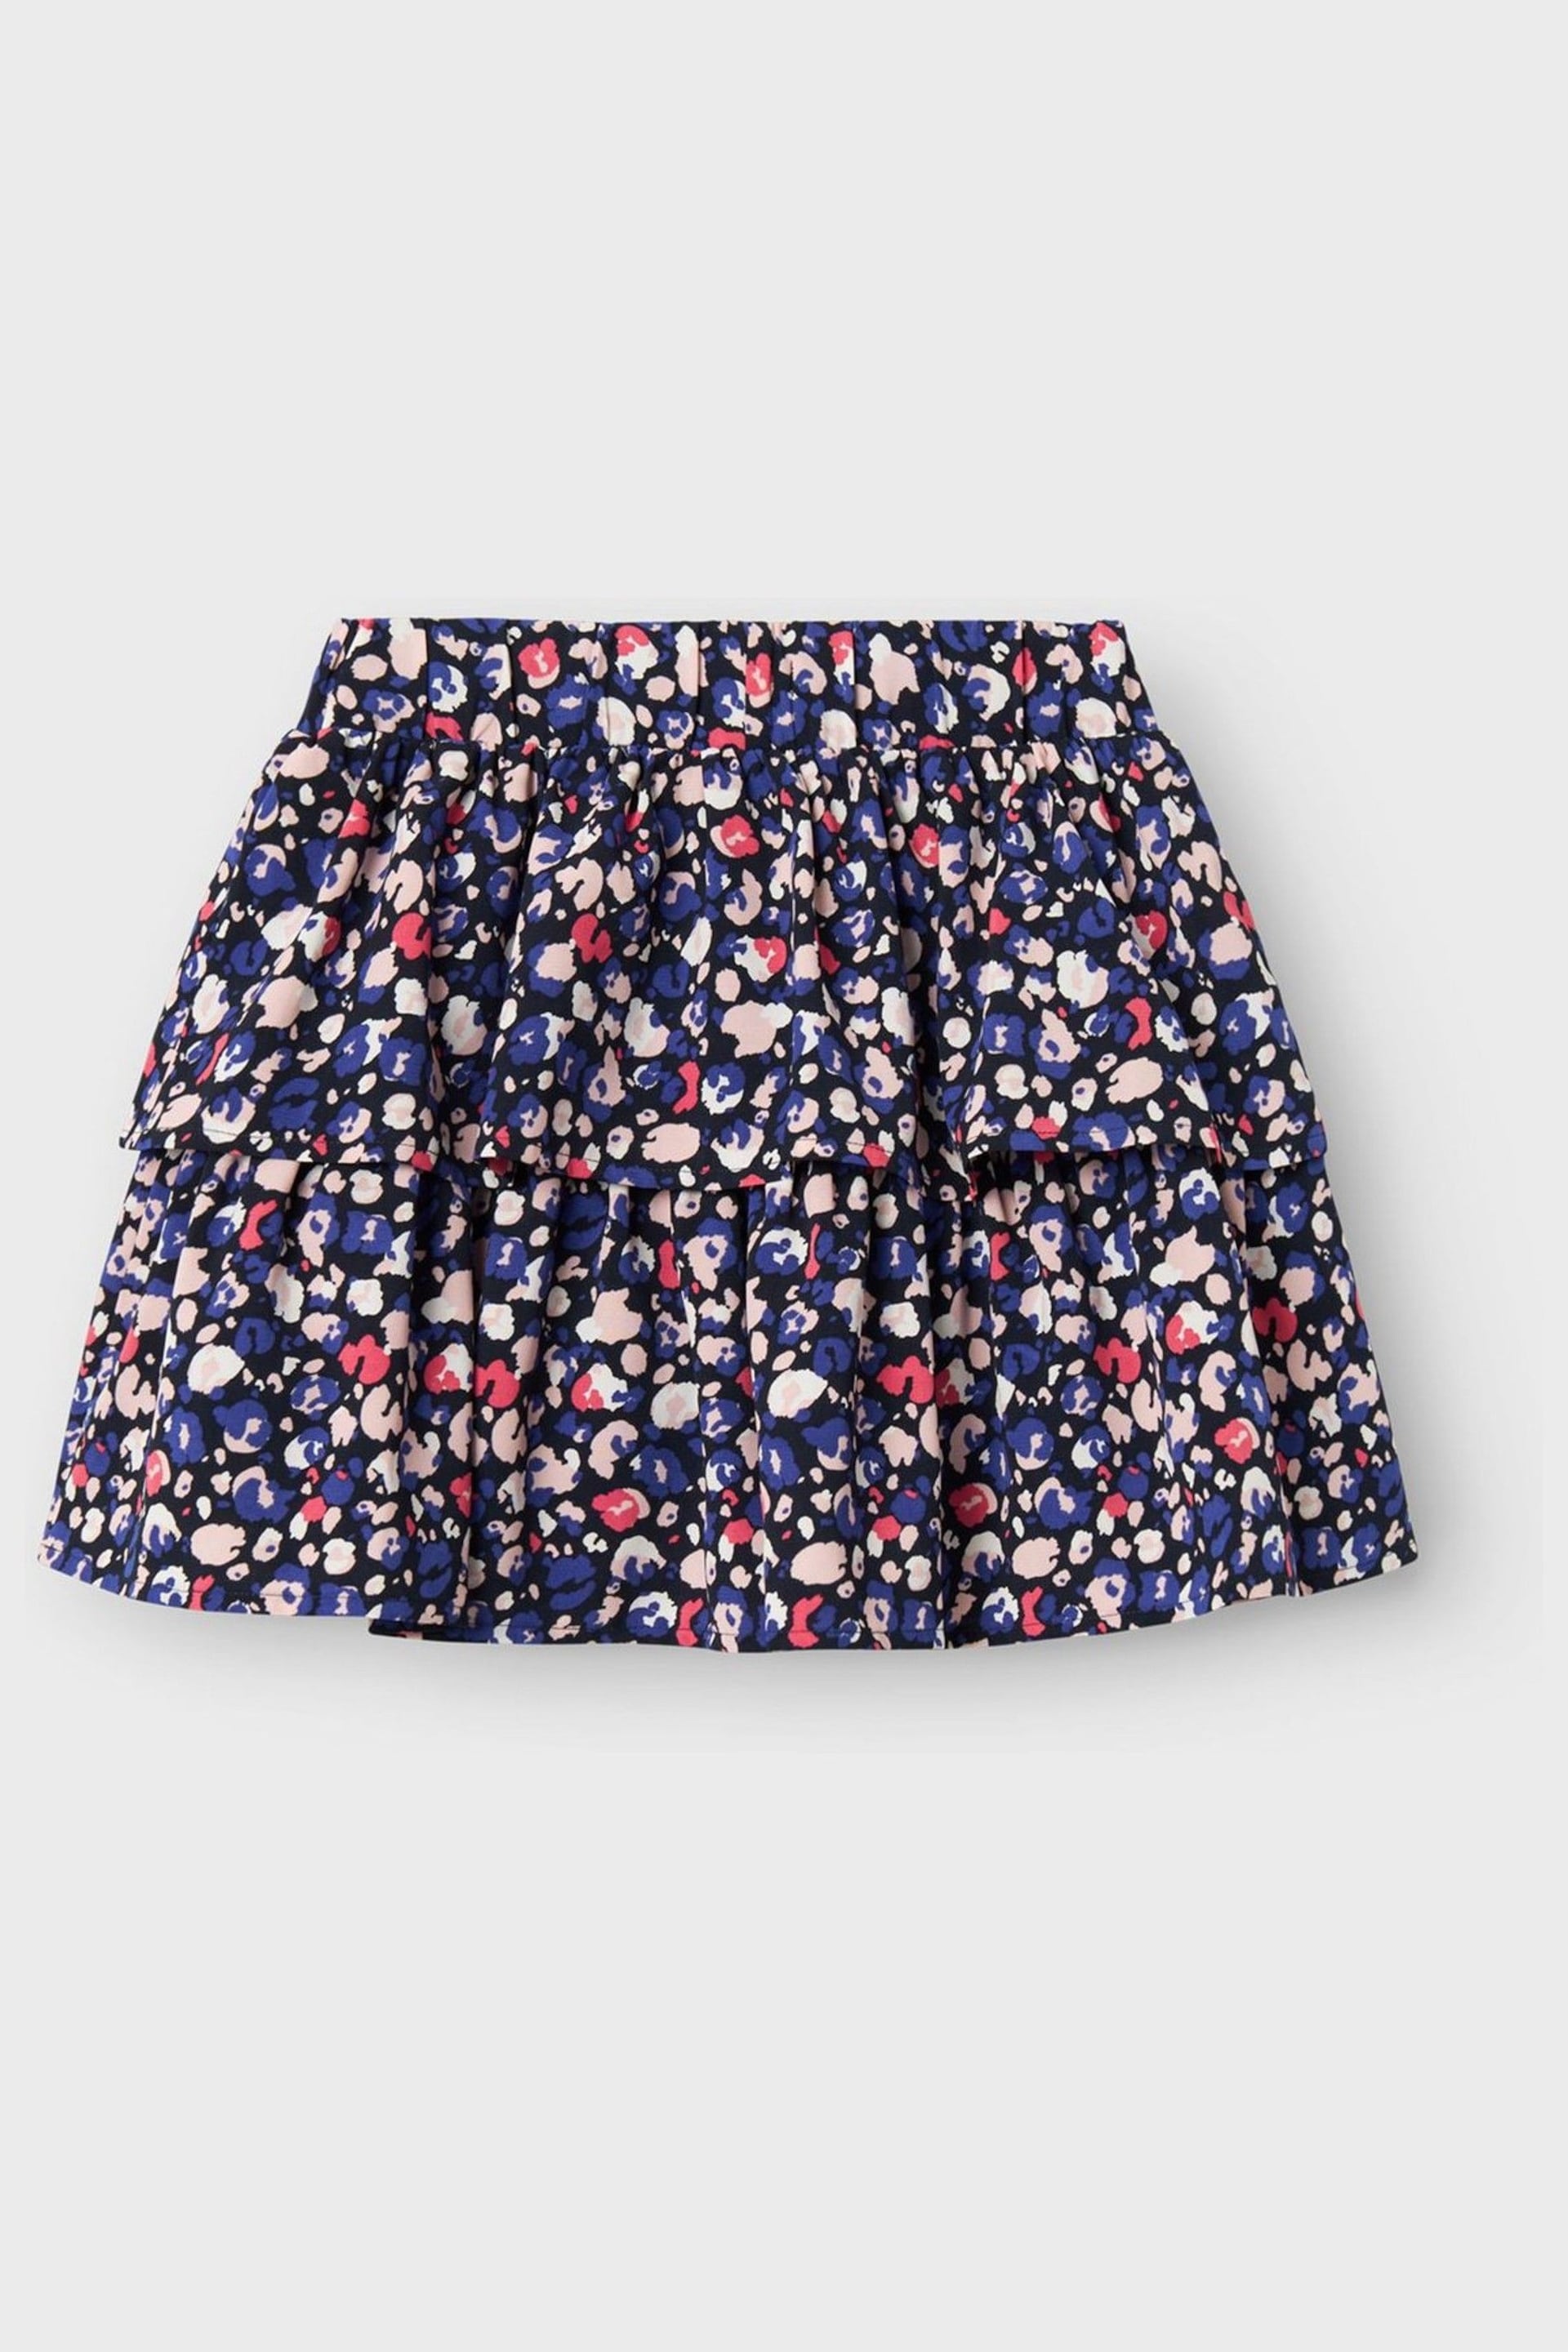 Name It Blue Printed Skirt - Image 1 of 3